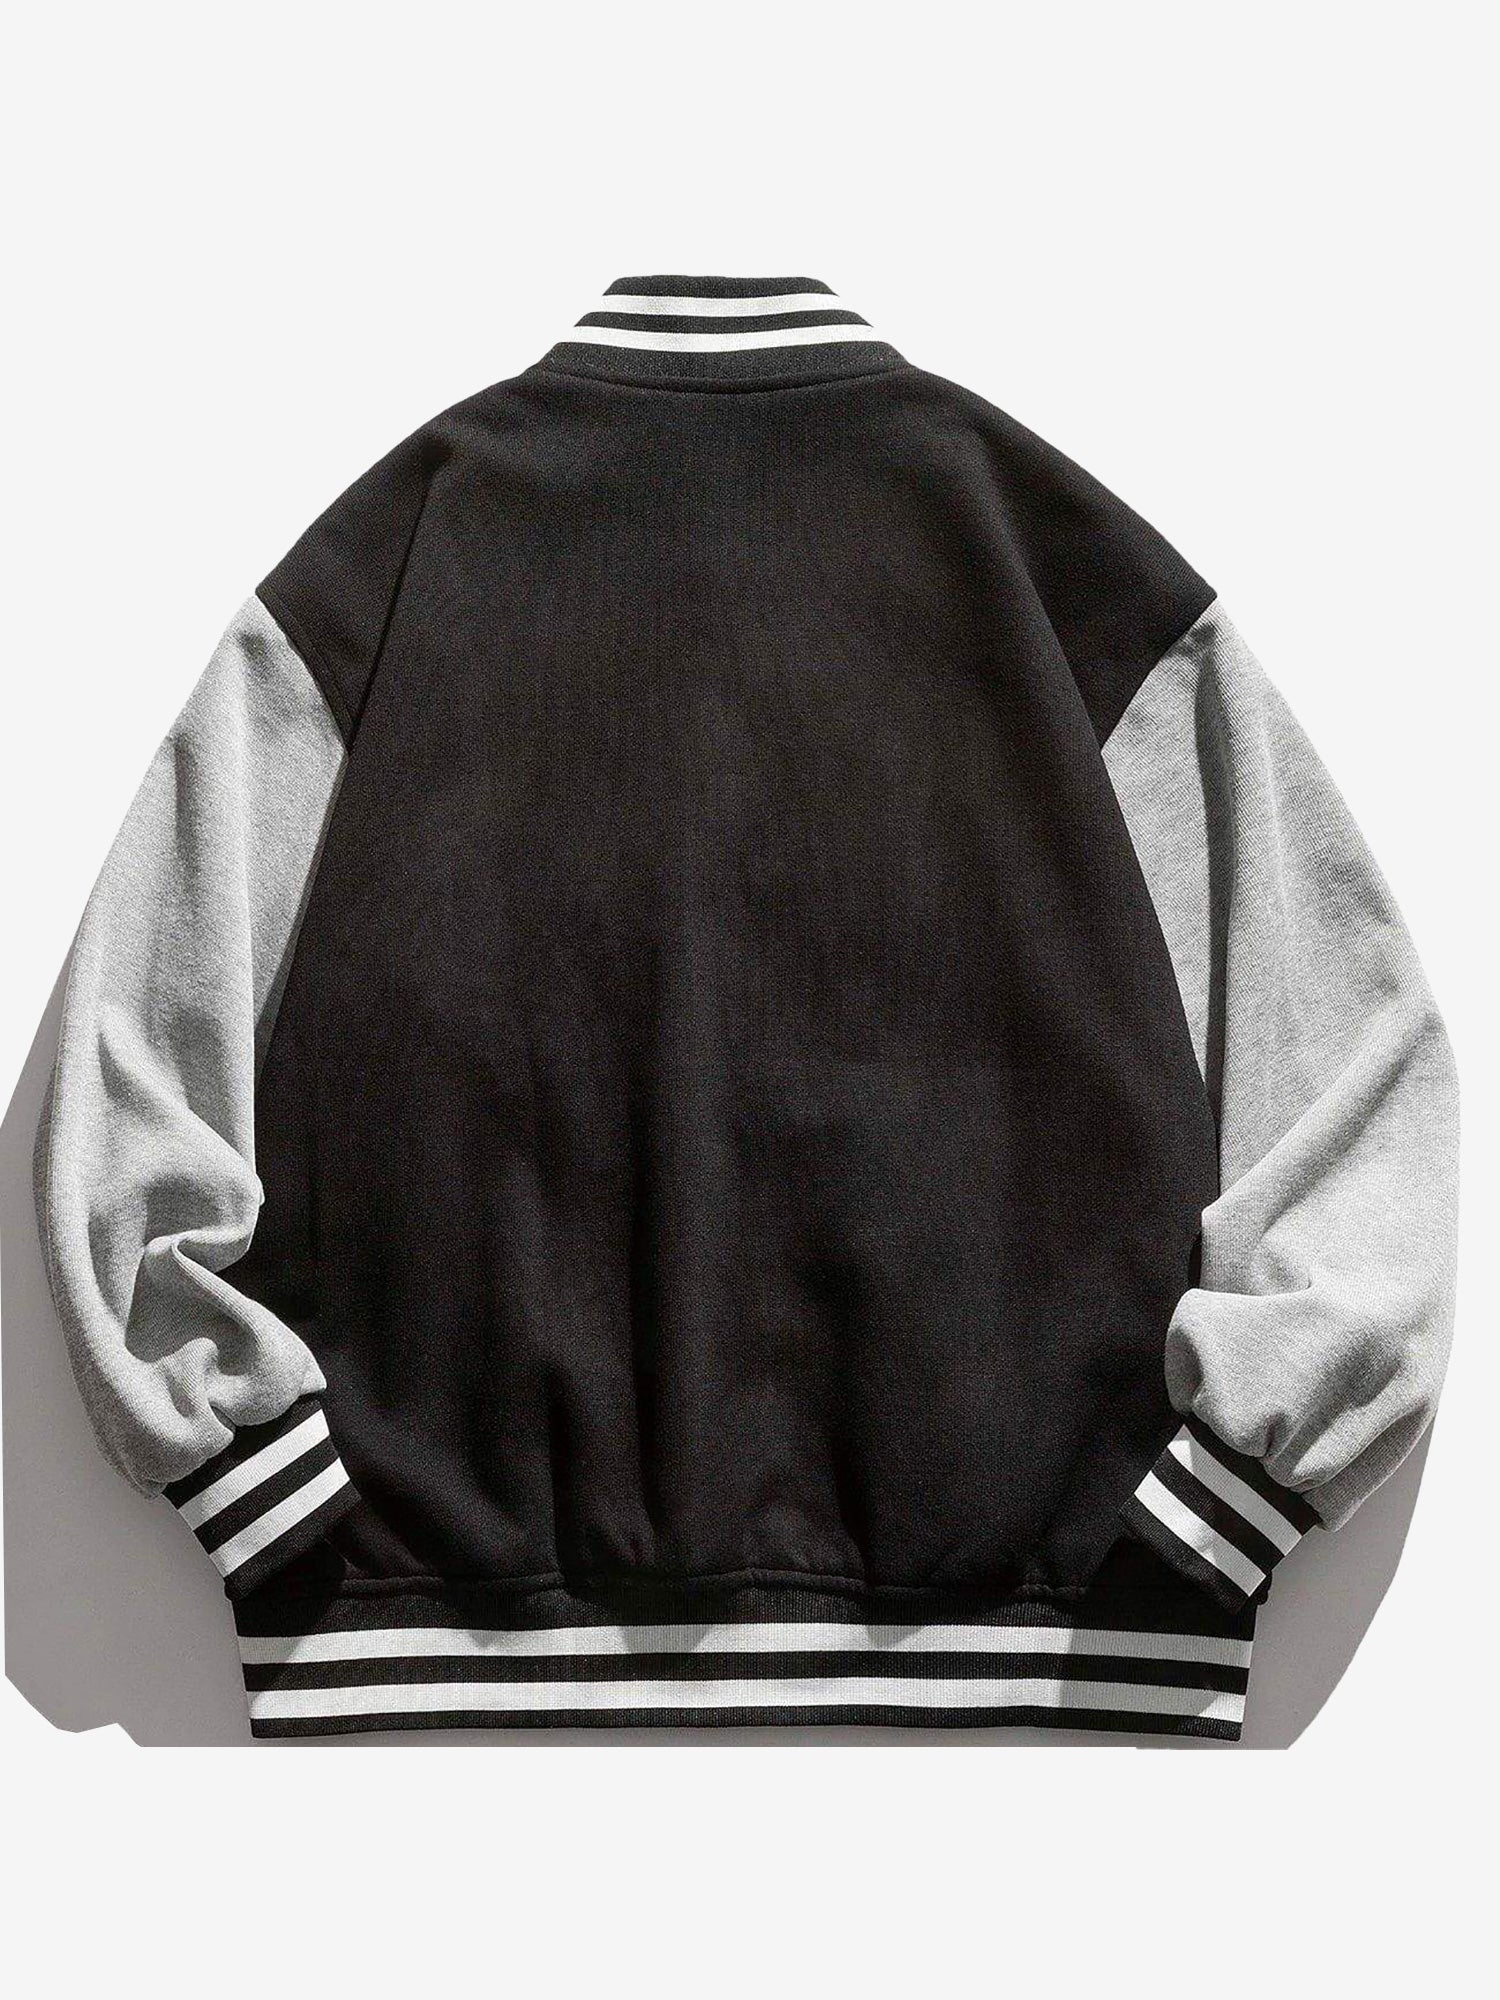 JUSTNOTAG Letter Embroidery Color Matching Varsity Jacket